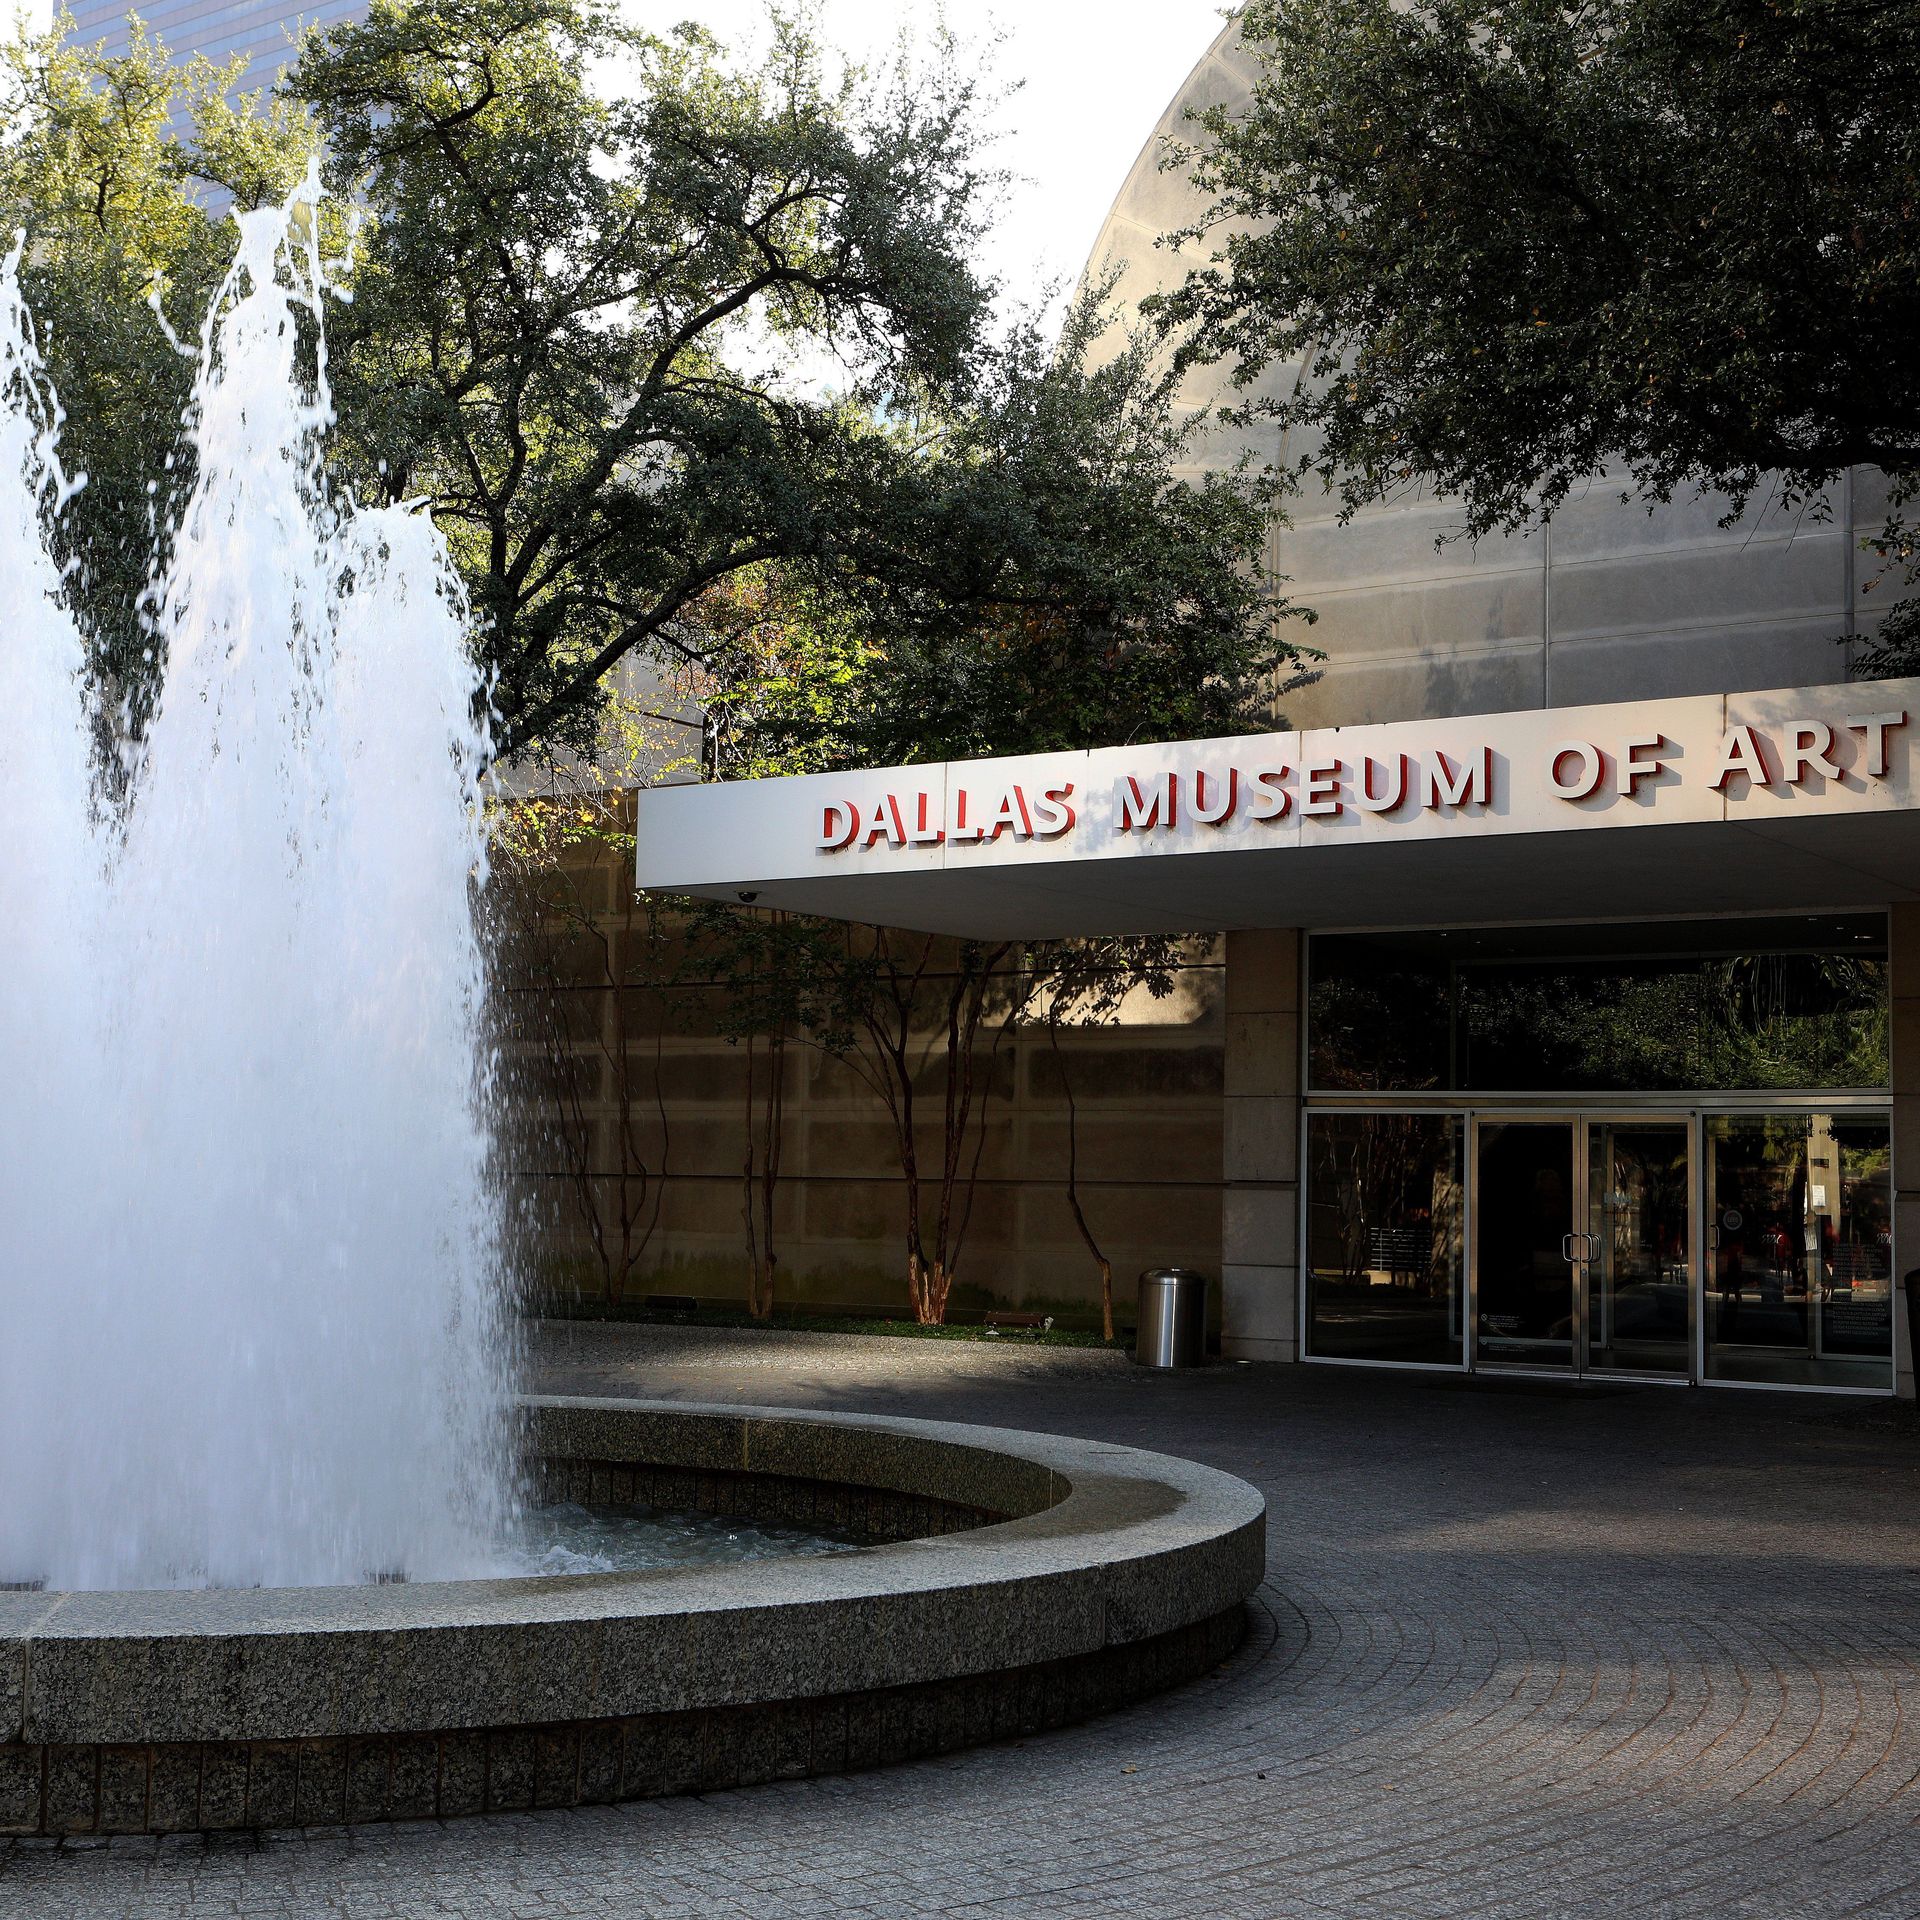 The front of the Dallas Museum of Art